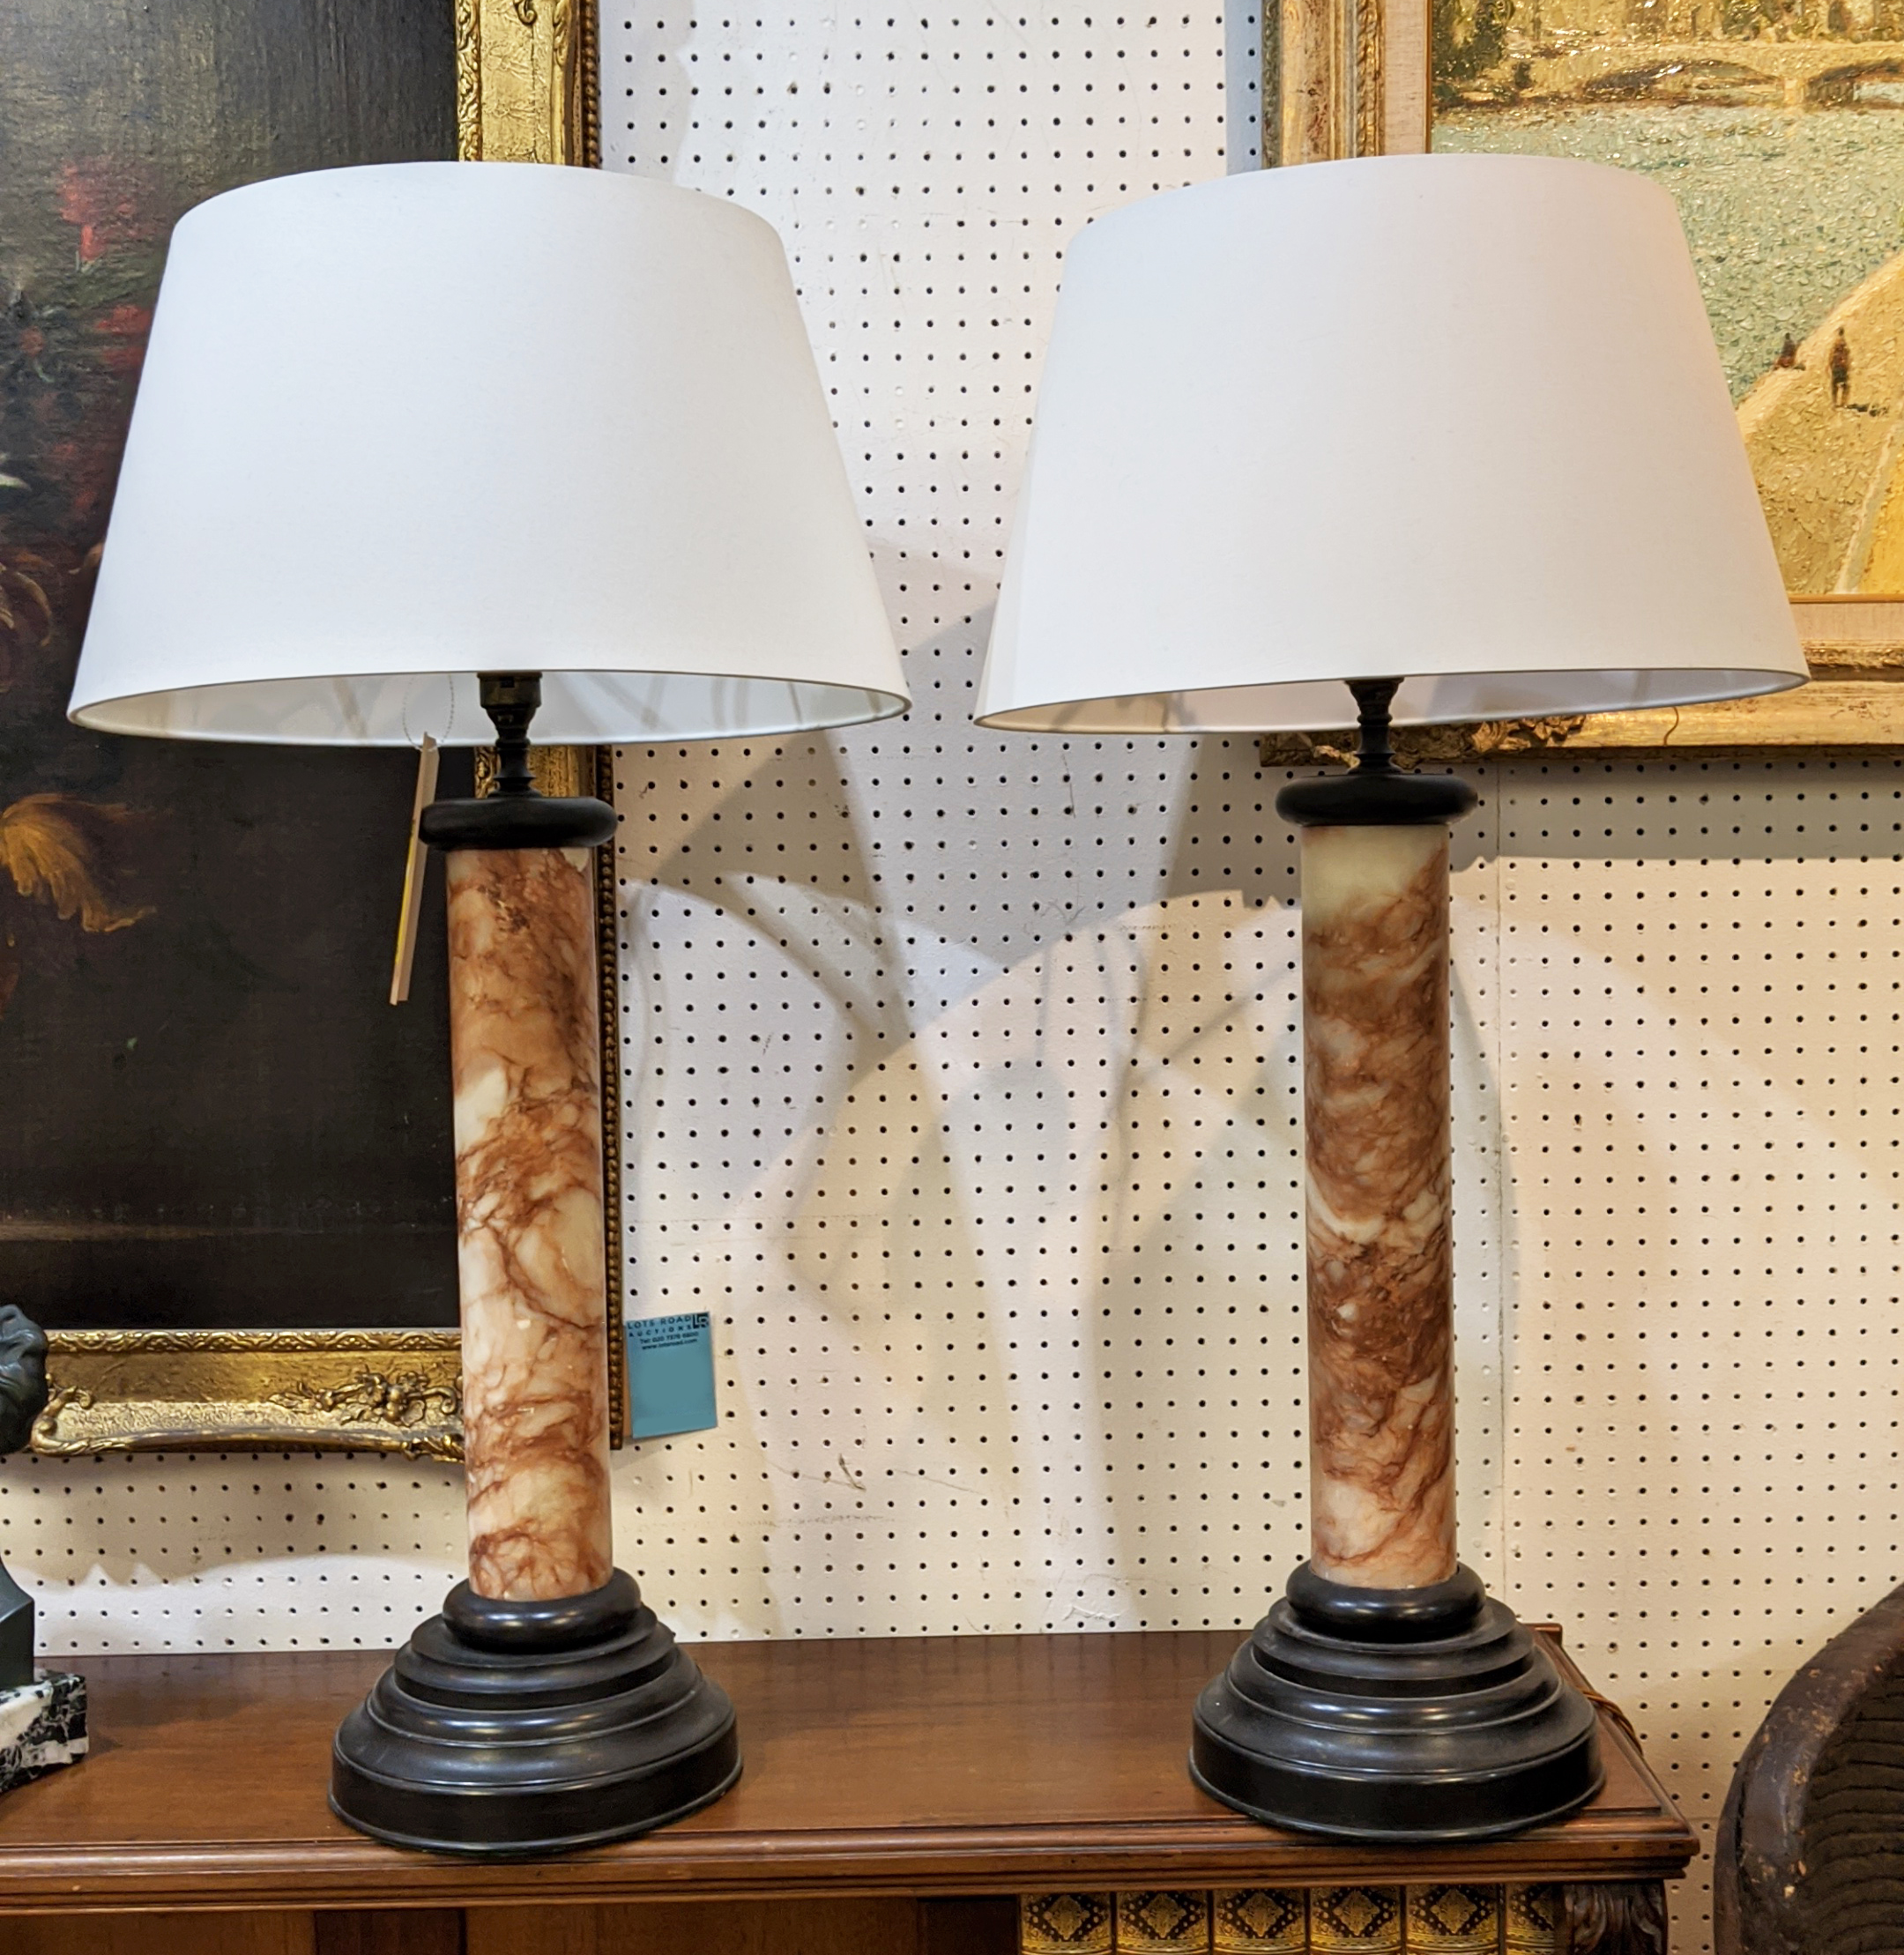 COLUMN LAMPS, a pair, circa 1920s, grand tour style alabaster column form with stepped bronze